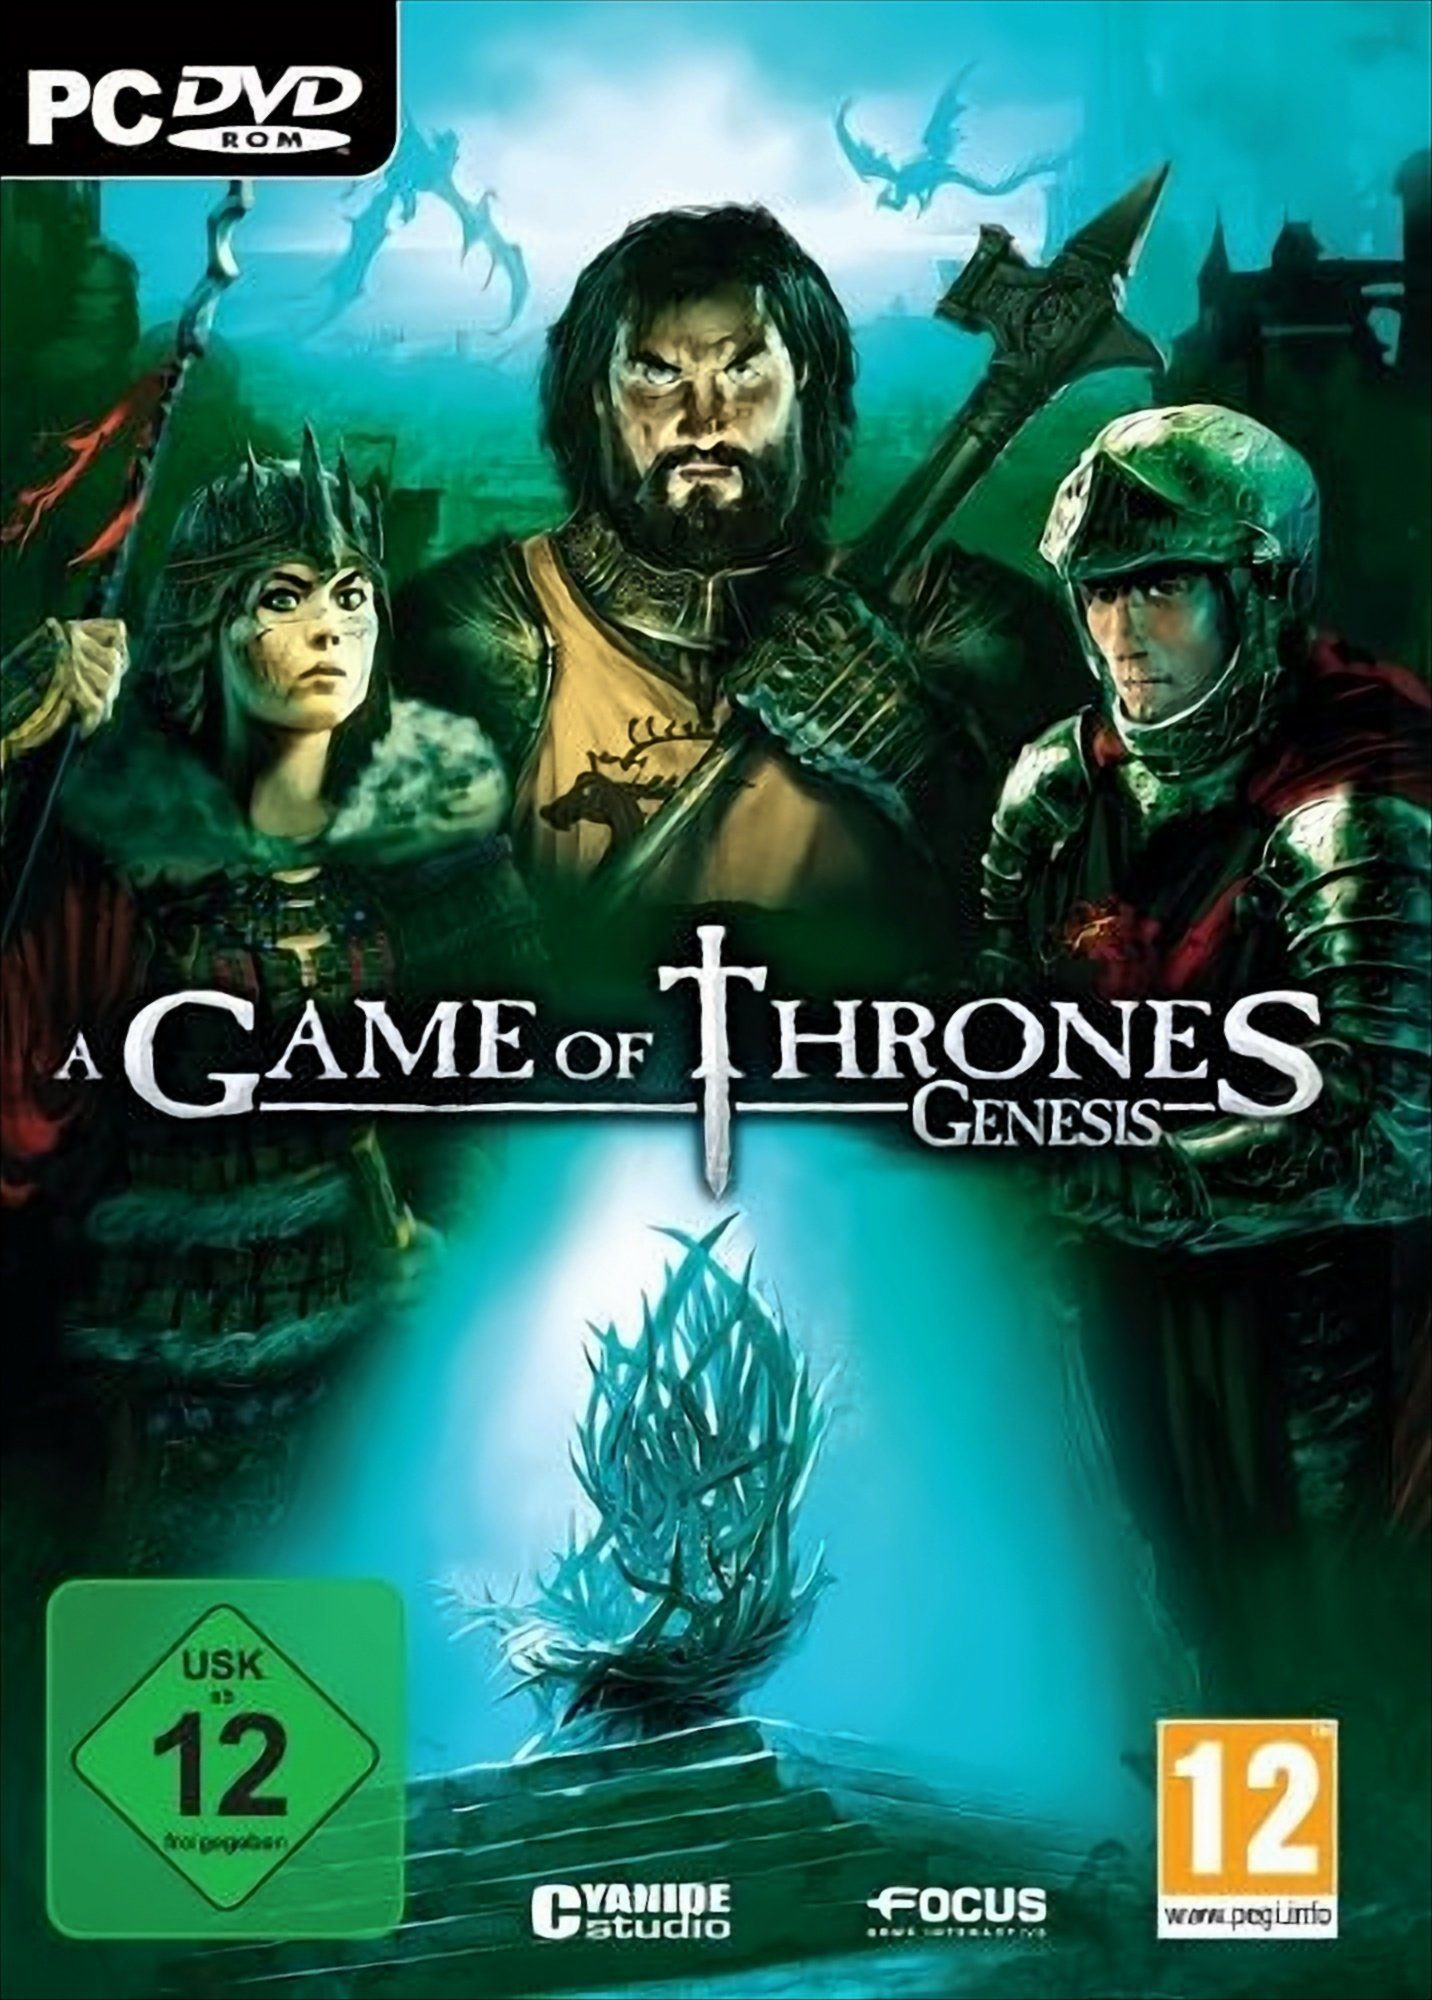 A Game Of Thrones: Genesis PC